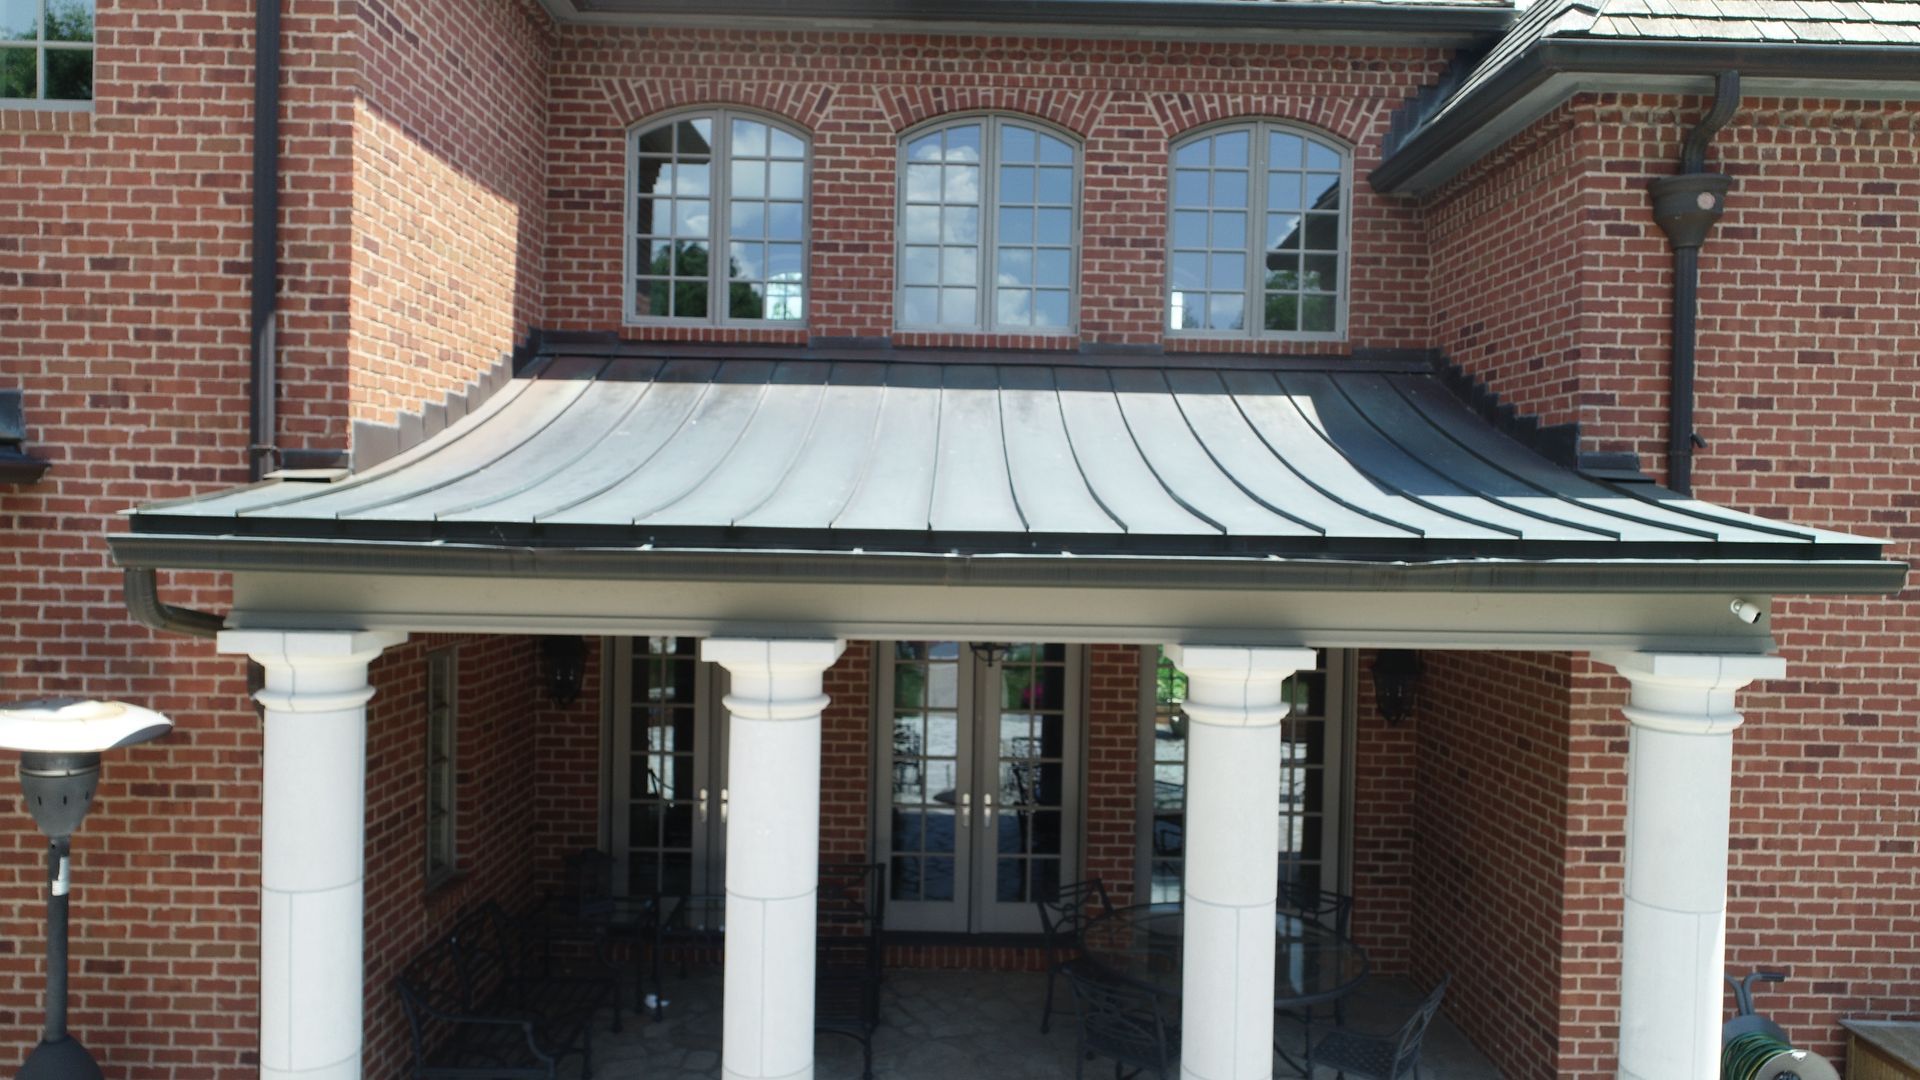 Curved Copper Standing Seam Panel Roof - Elegance and Durability in Metal Roofing